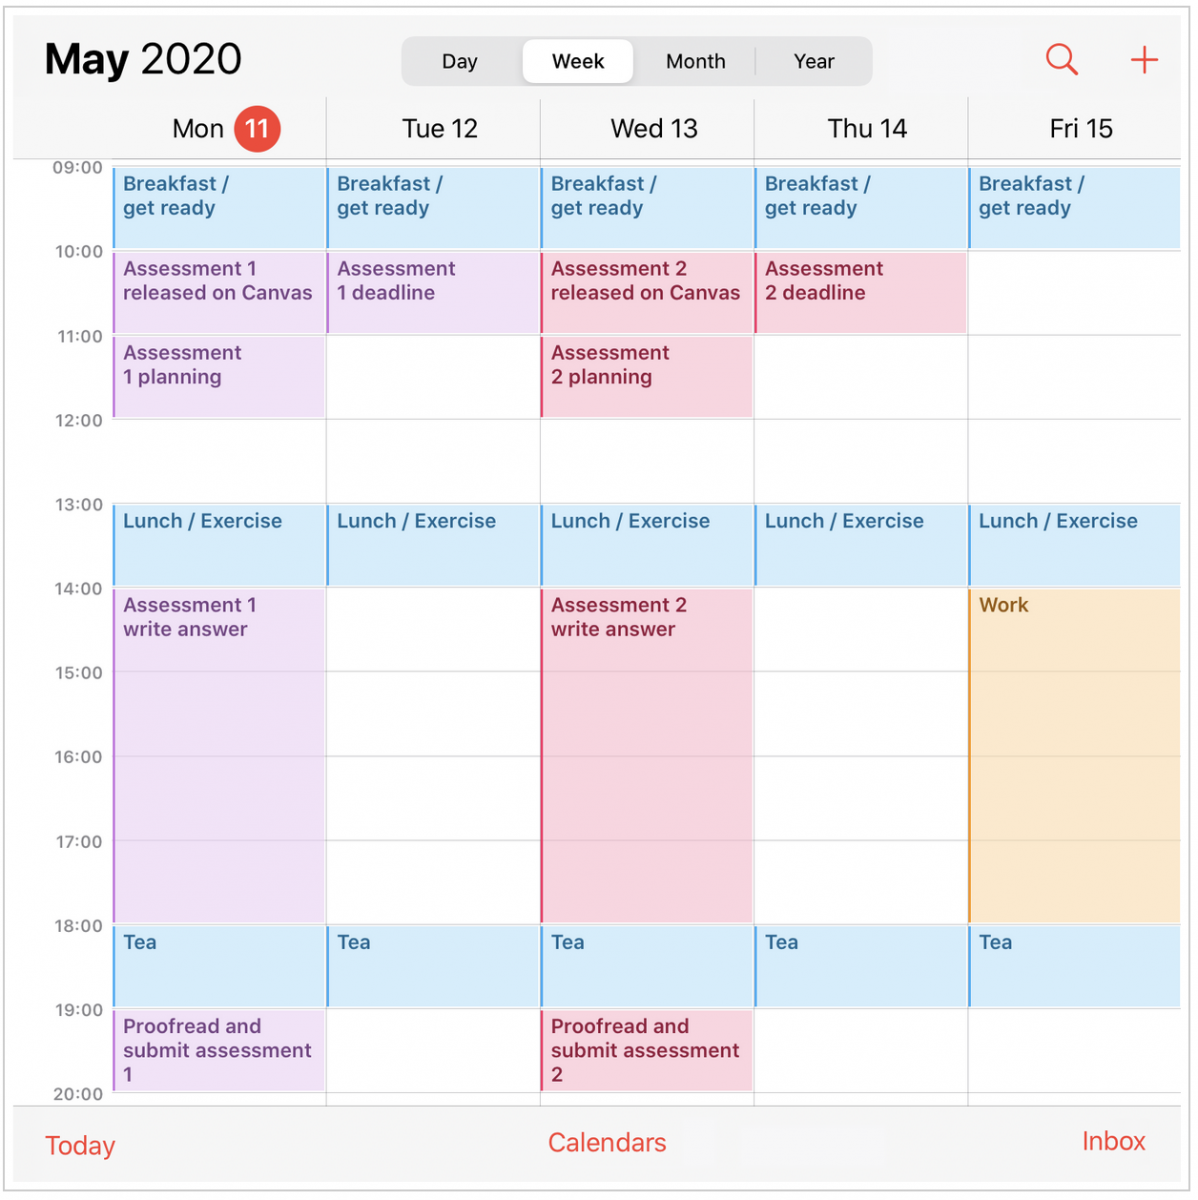 An image of a 2020 calendar with proofreading and submiting time added